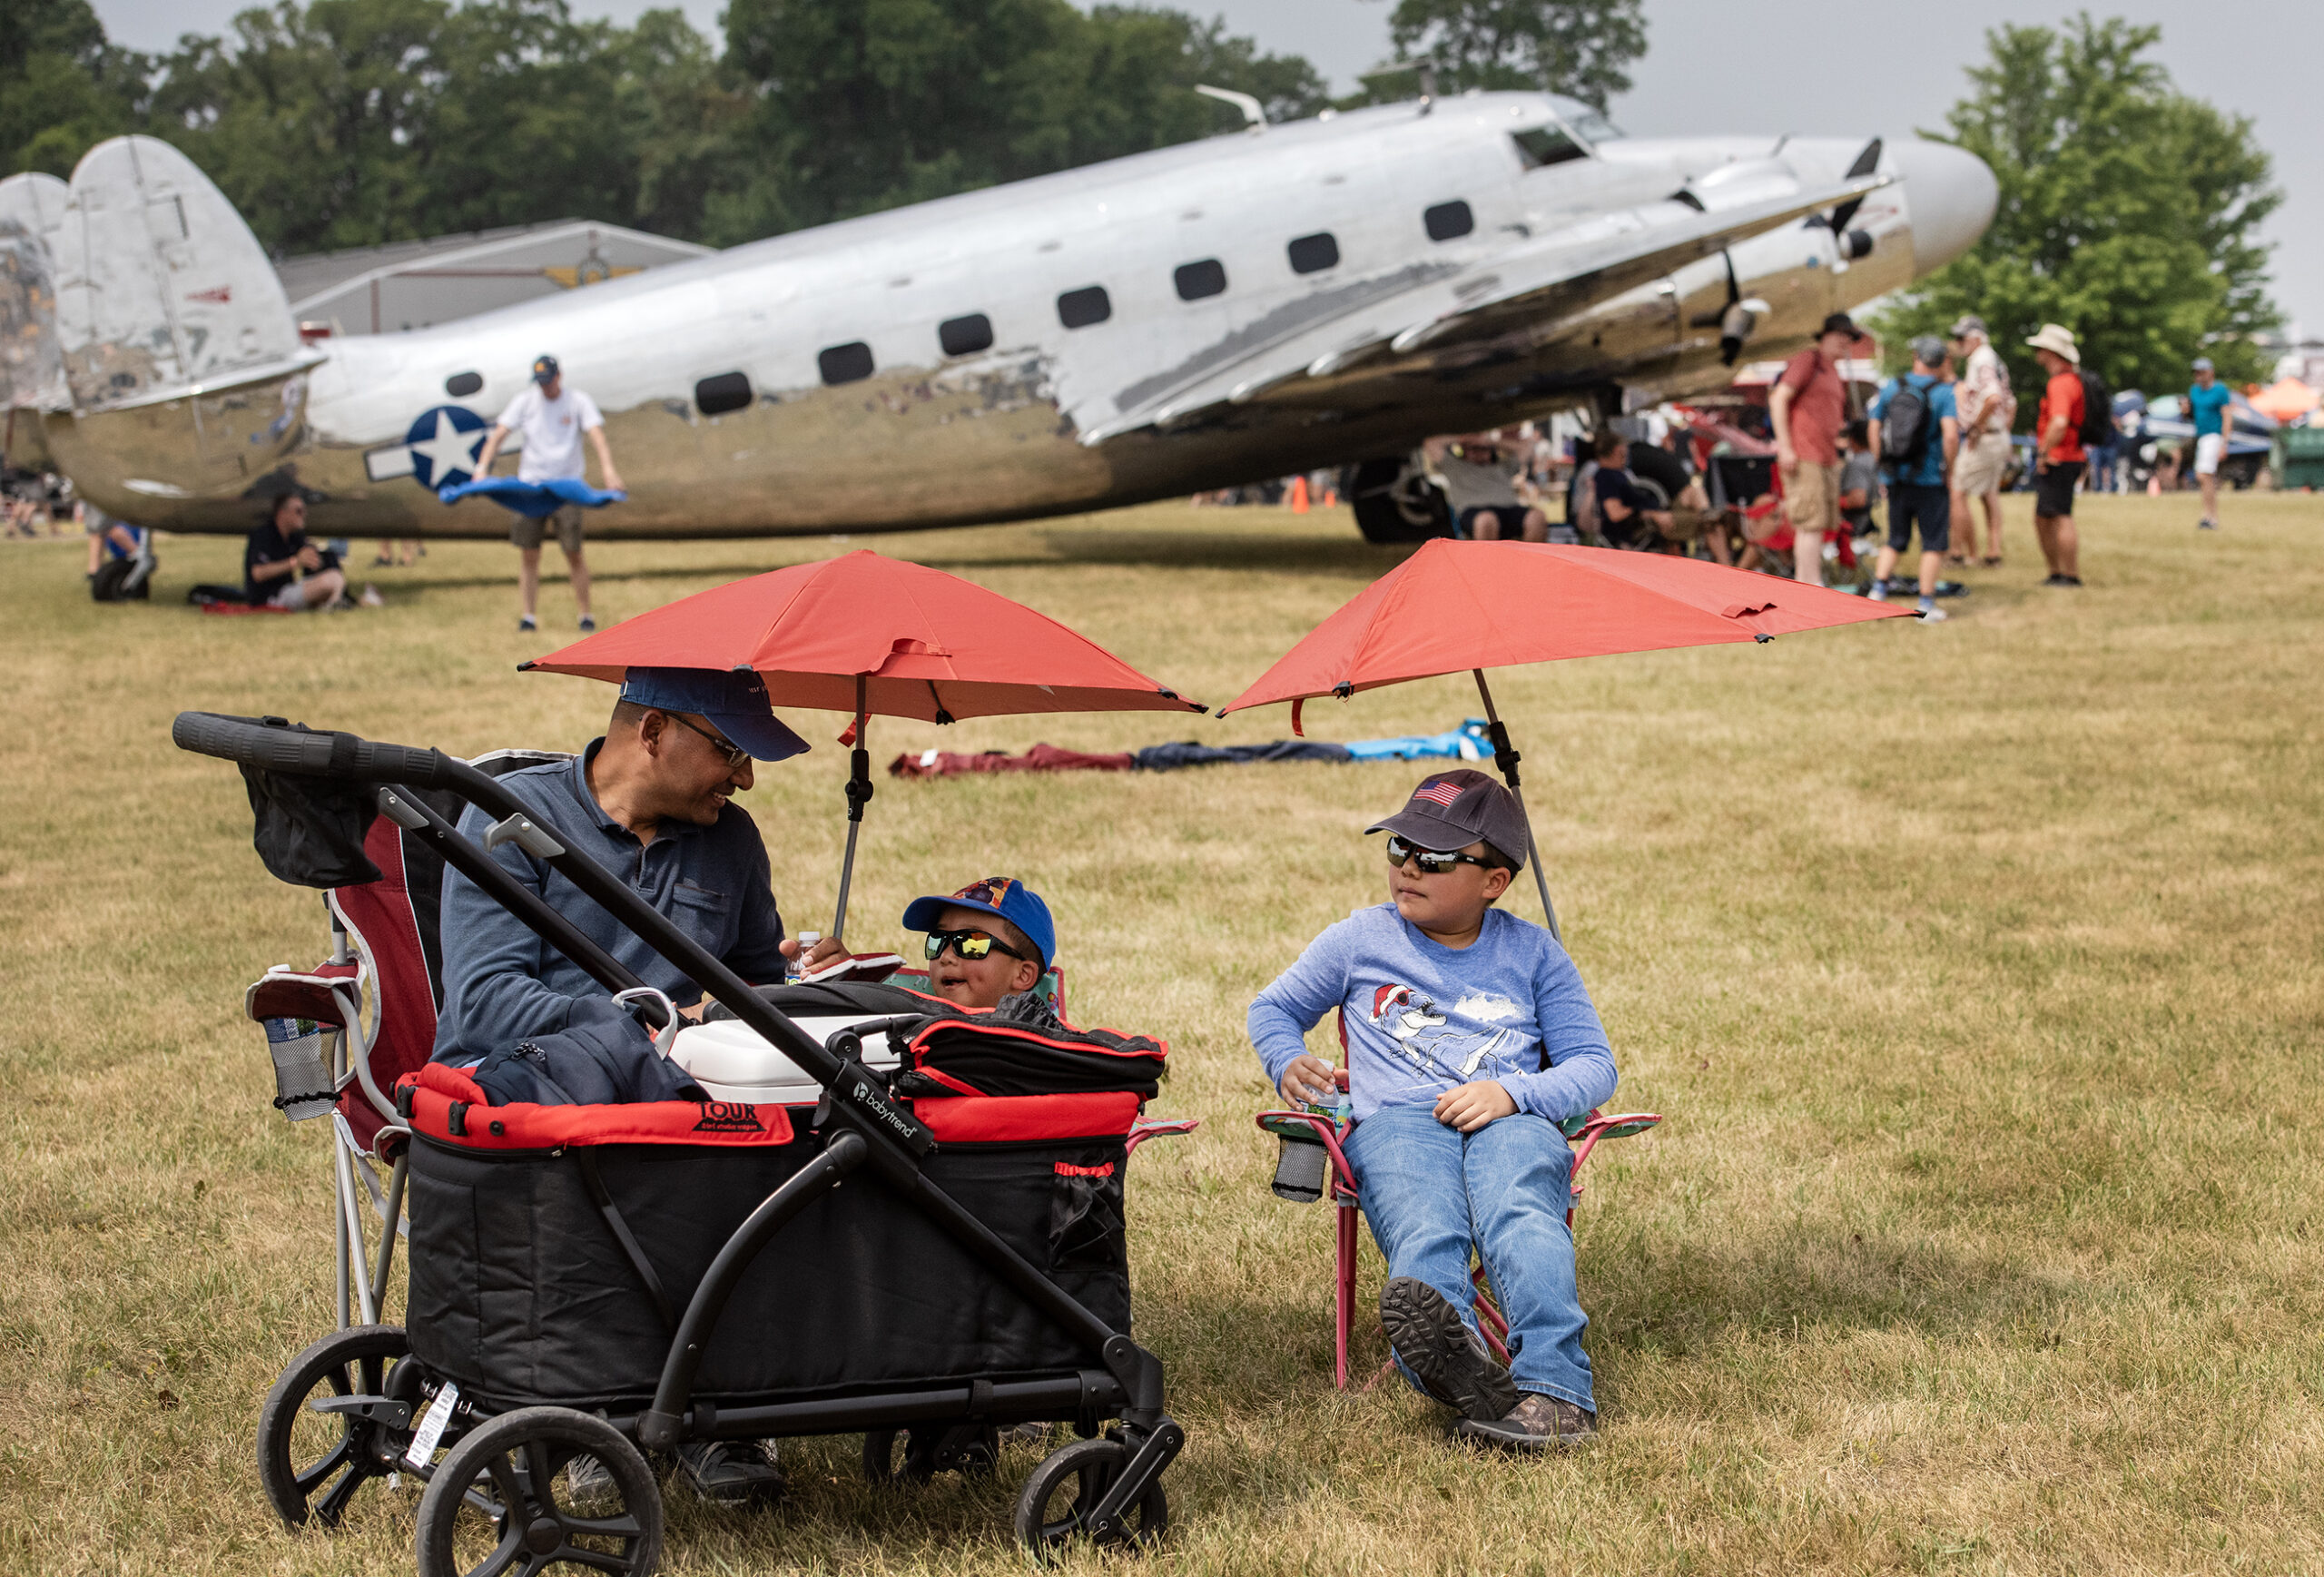 A dad sits with two small boys in lawn chairs underneath umbrellas. A large silver airplane can be seen behind them.